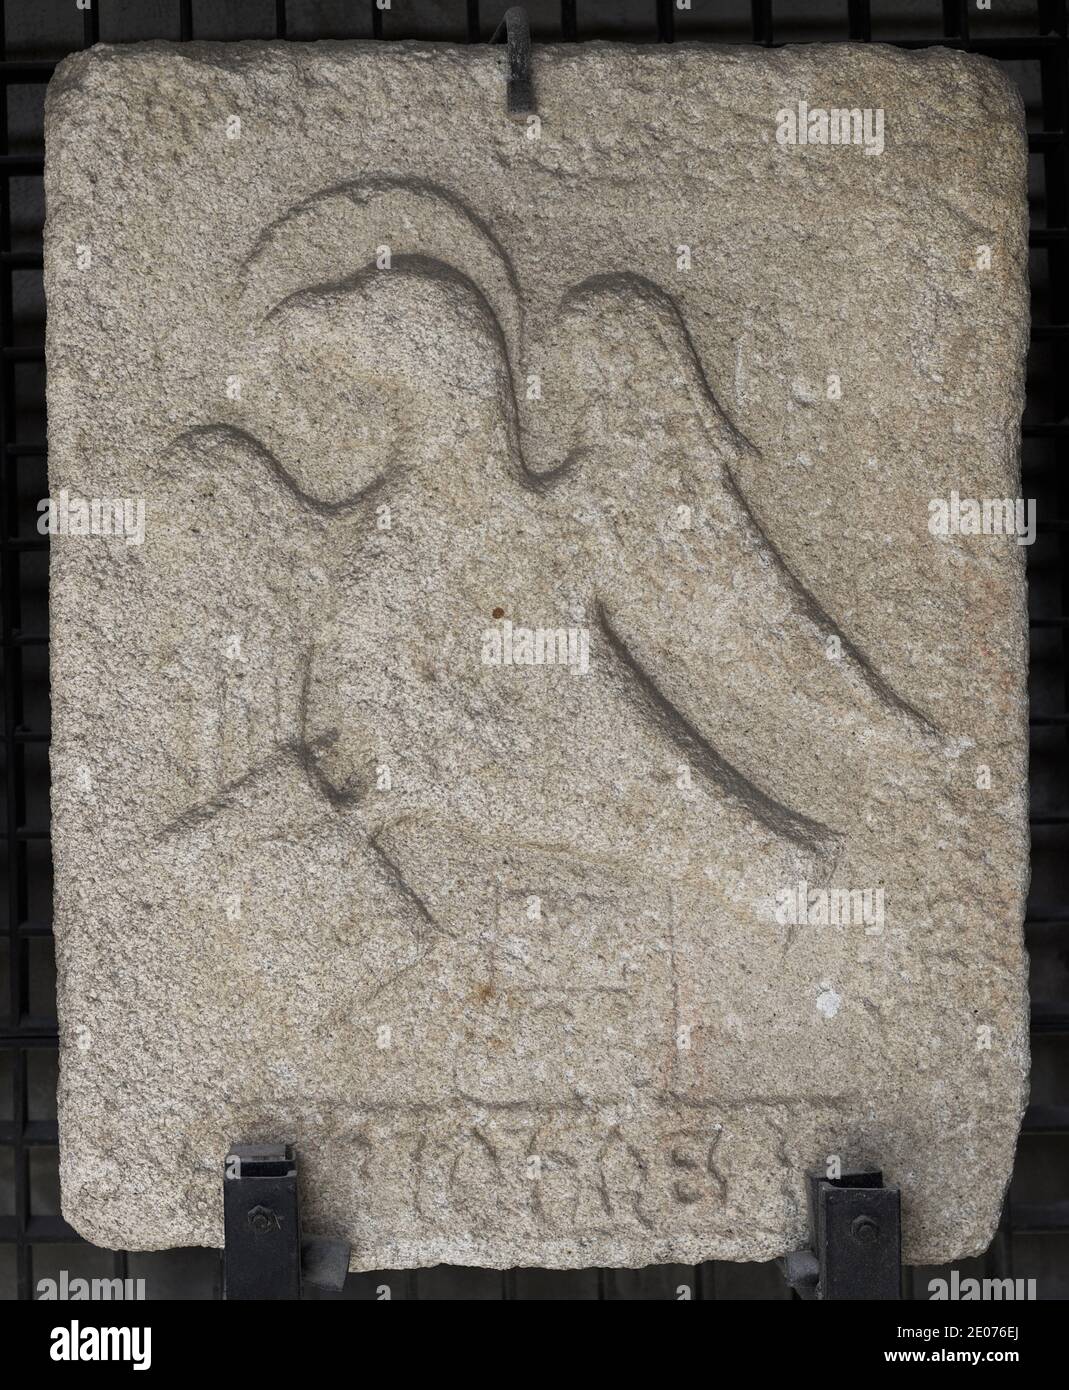 Stone slab showing a haloed eagle symbolizing Saint John (Tetramorph). 1475-1525. Probably from the Church of Santo Domingo or the Church of Santo Tomás (La Coruña, Galicia, Spain). Archaeological and History Museum (San Anton Castle). A Coruña, Galicia, Spain. Stock Photo